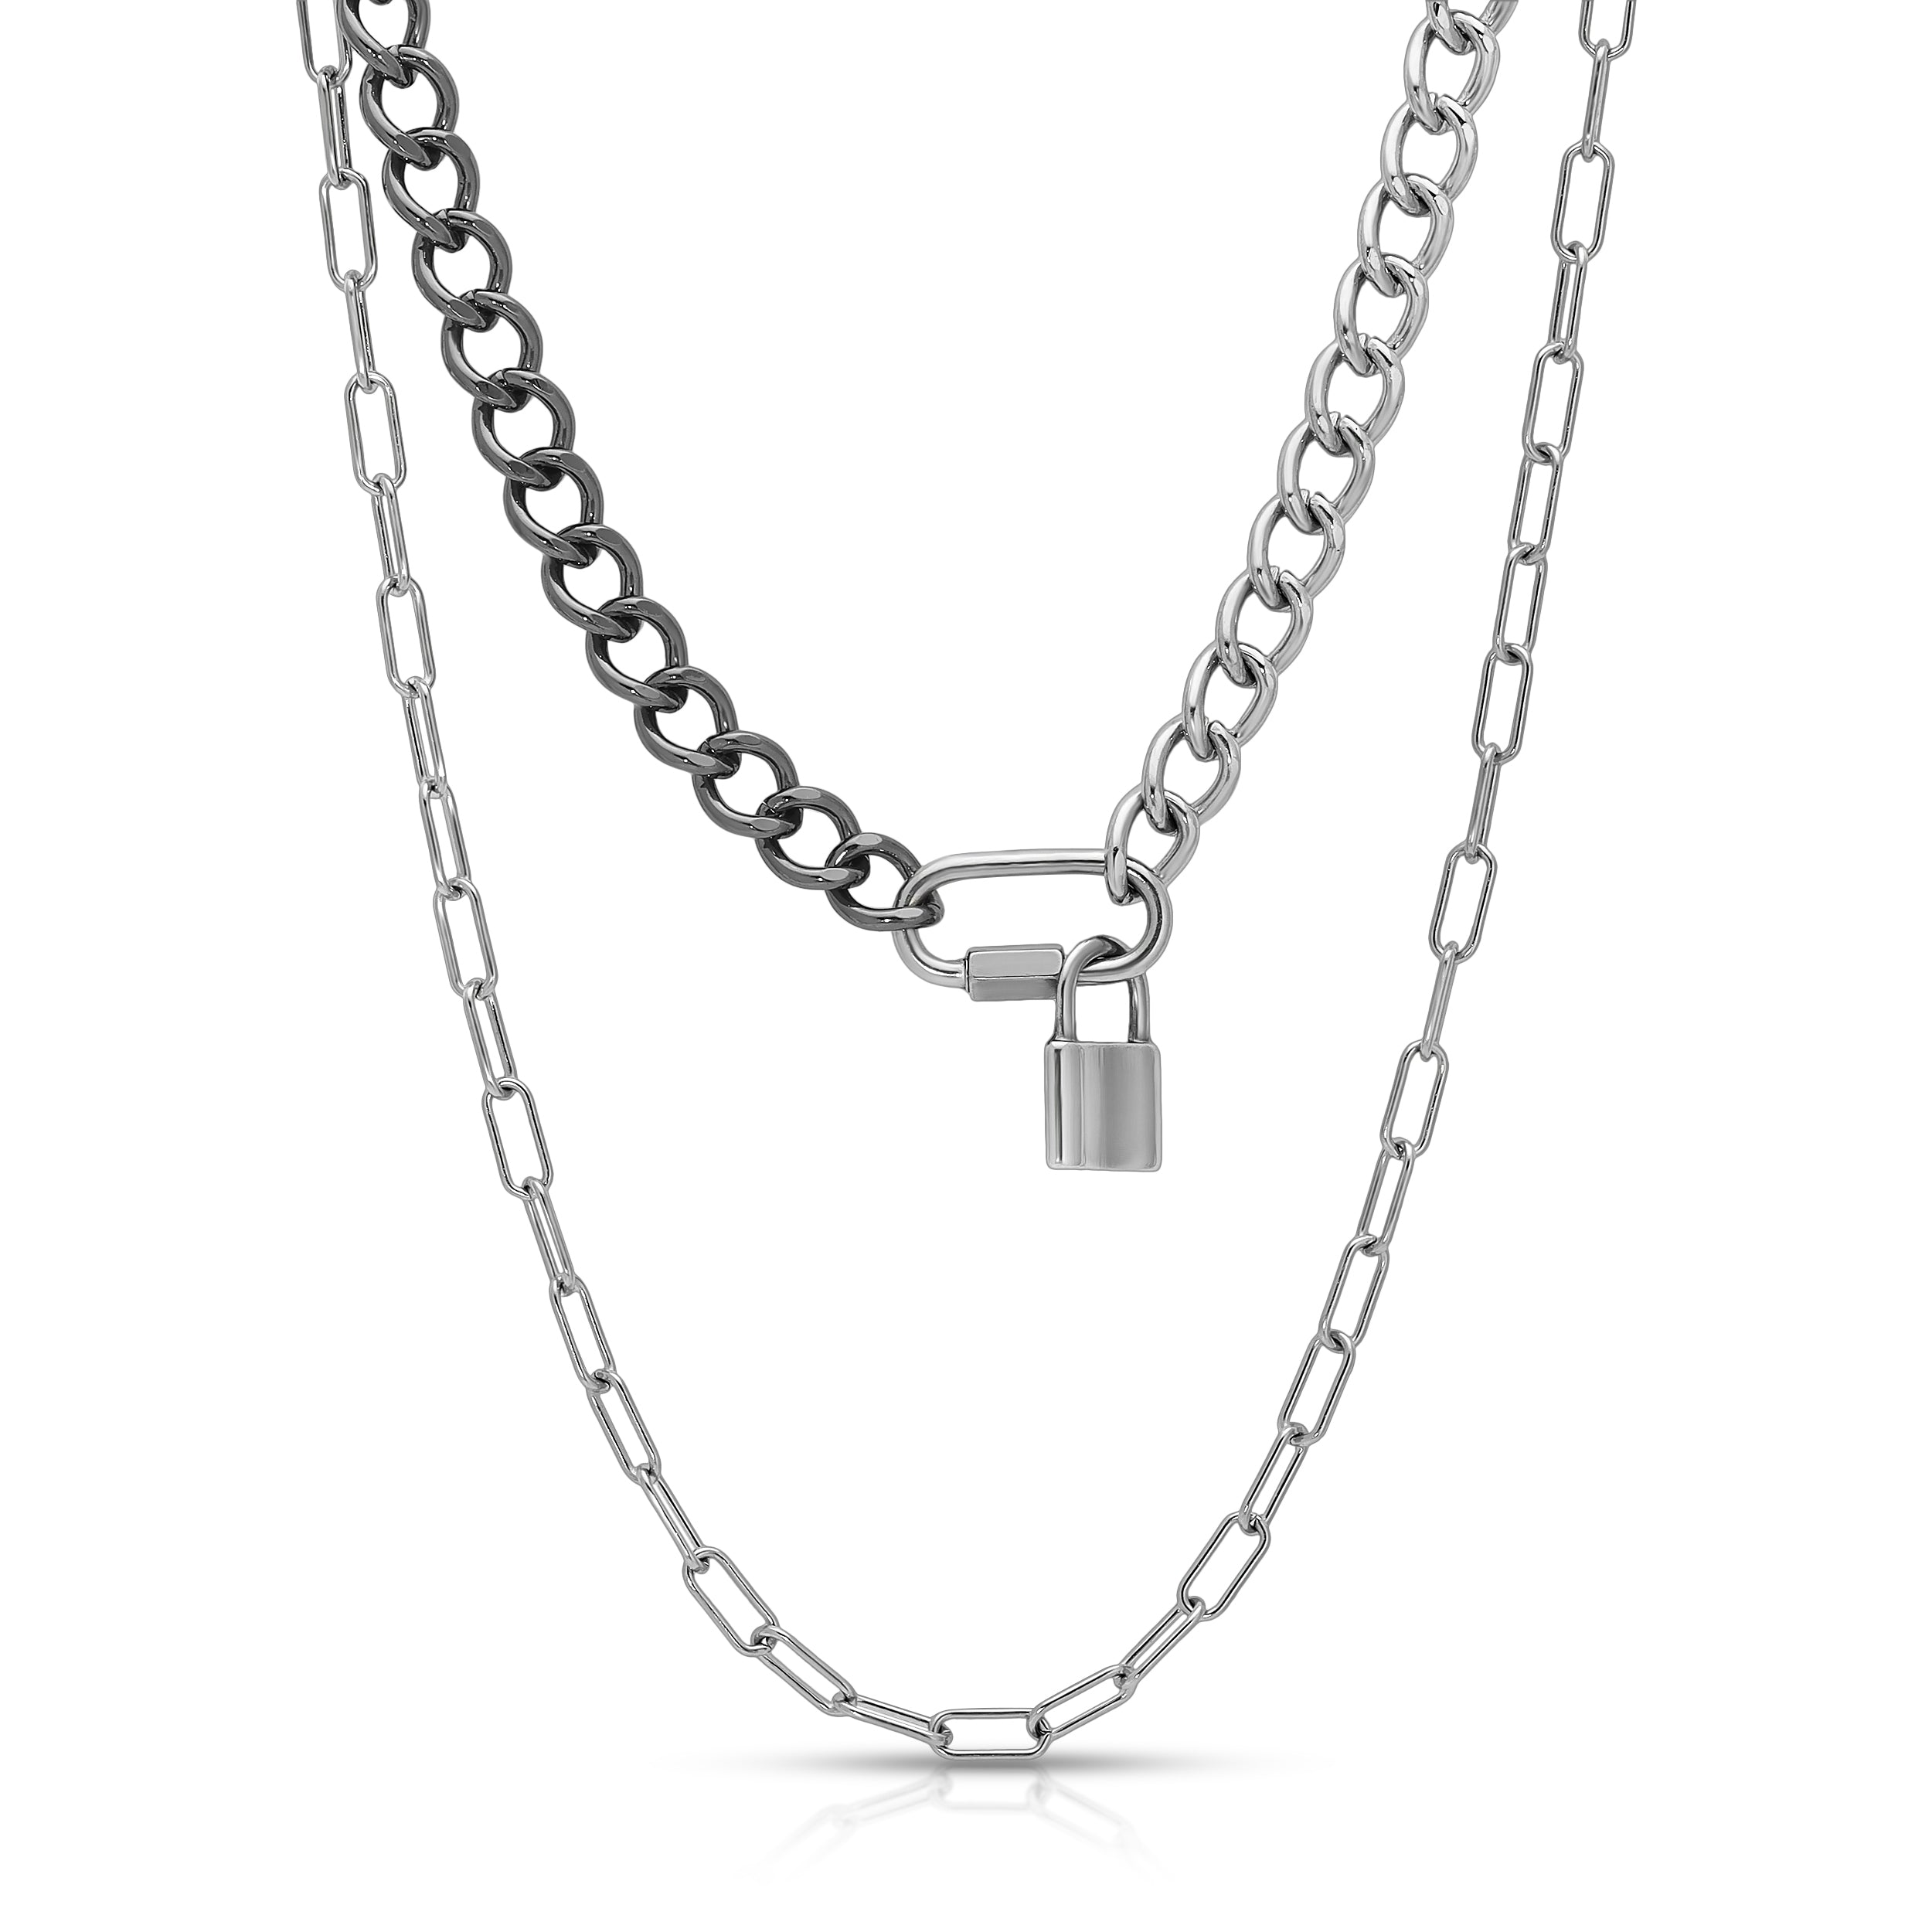 Chain Reaction Silver Locked Necklace  | Chain Necklace Women | Chain Reaction Necklace - JaJaara